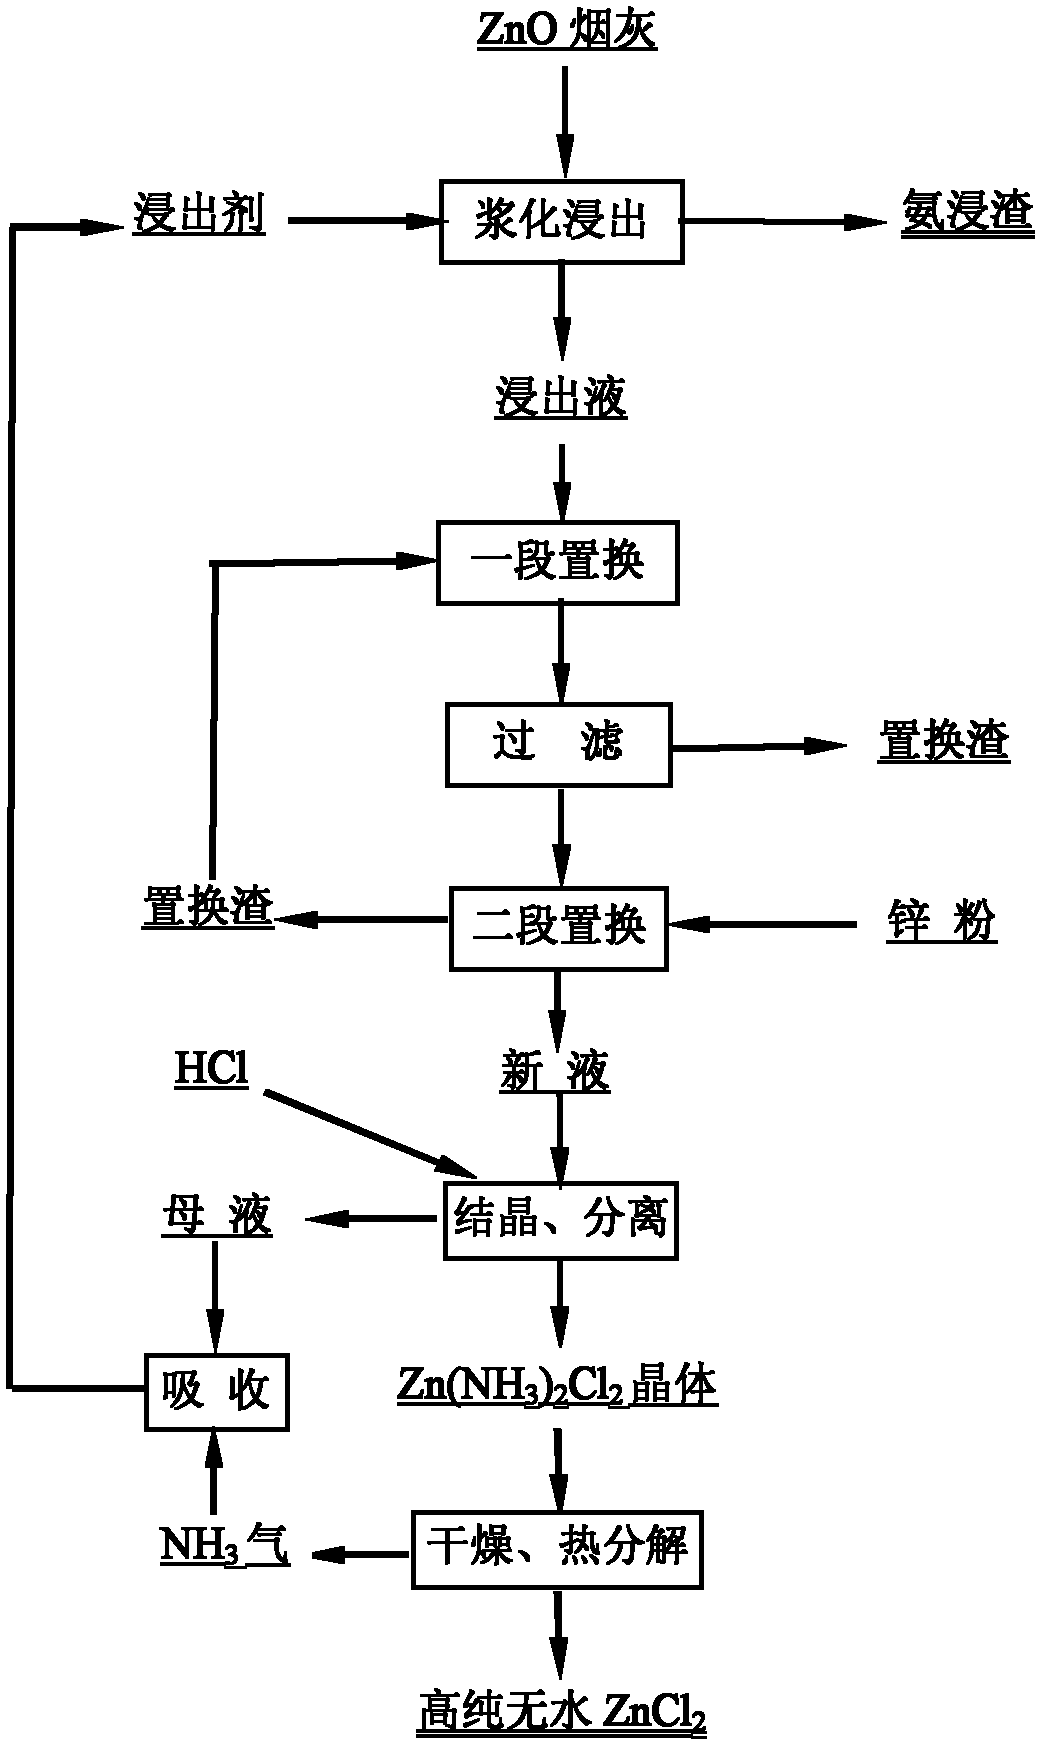 Method for producing high-purity anhydrous zinc chloride